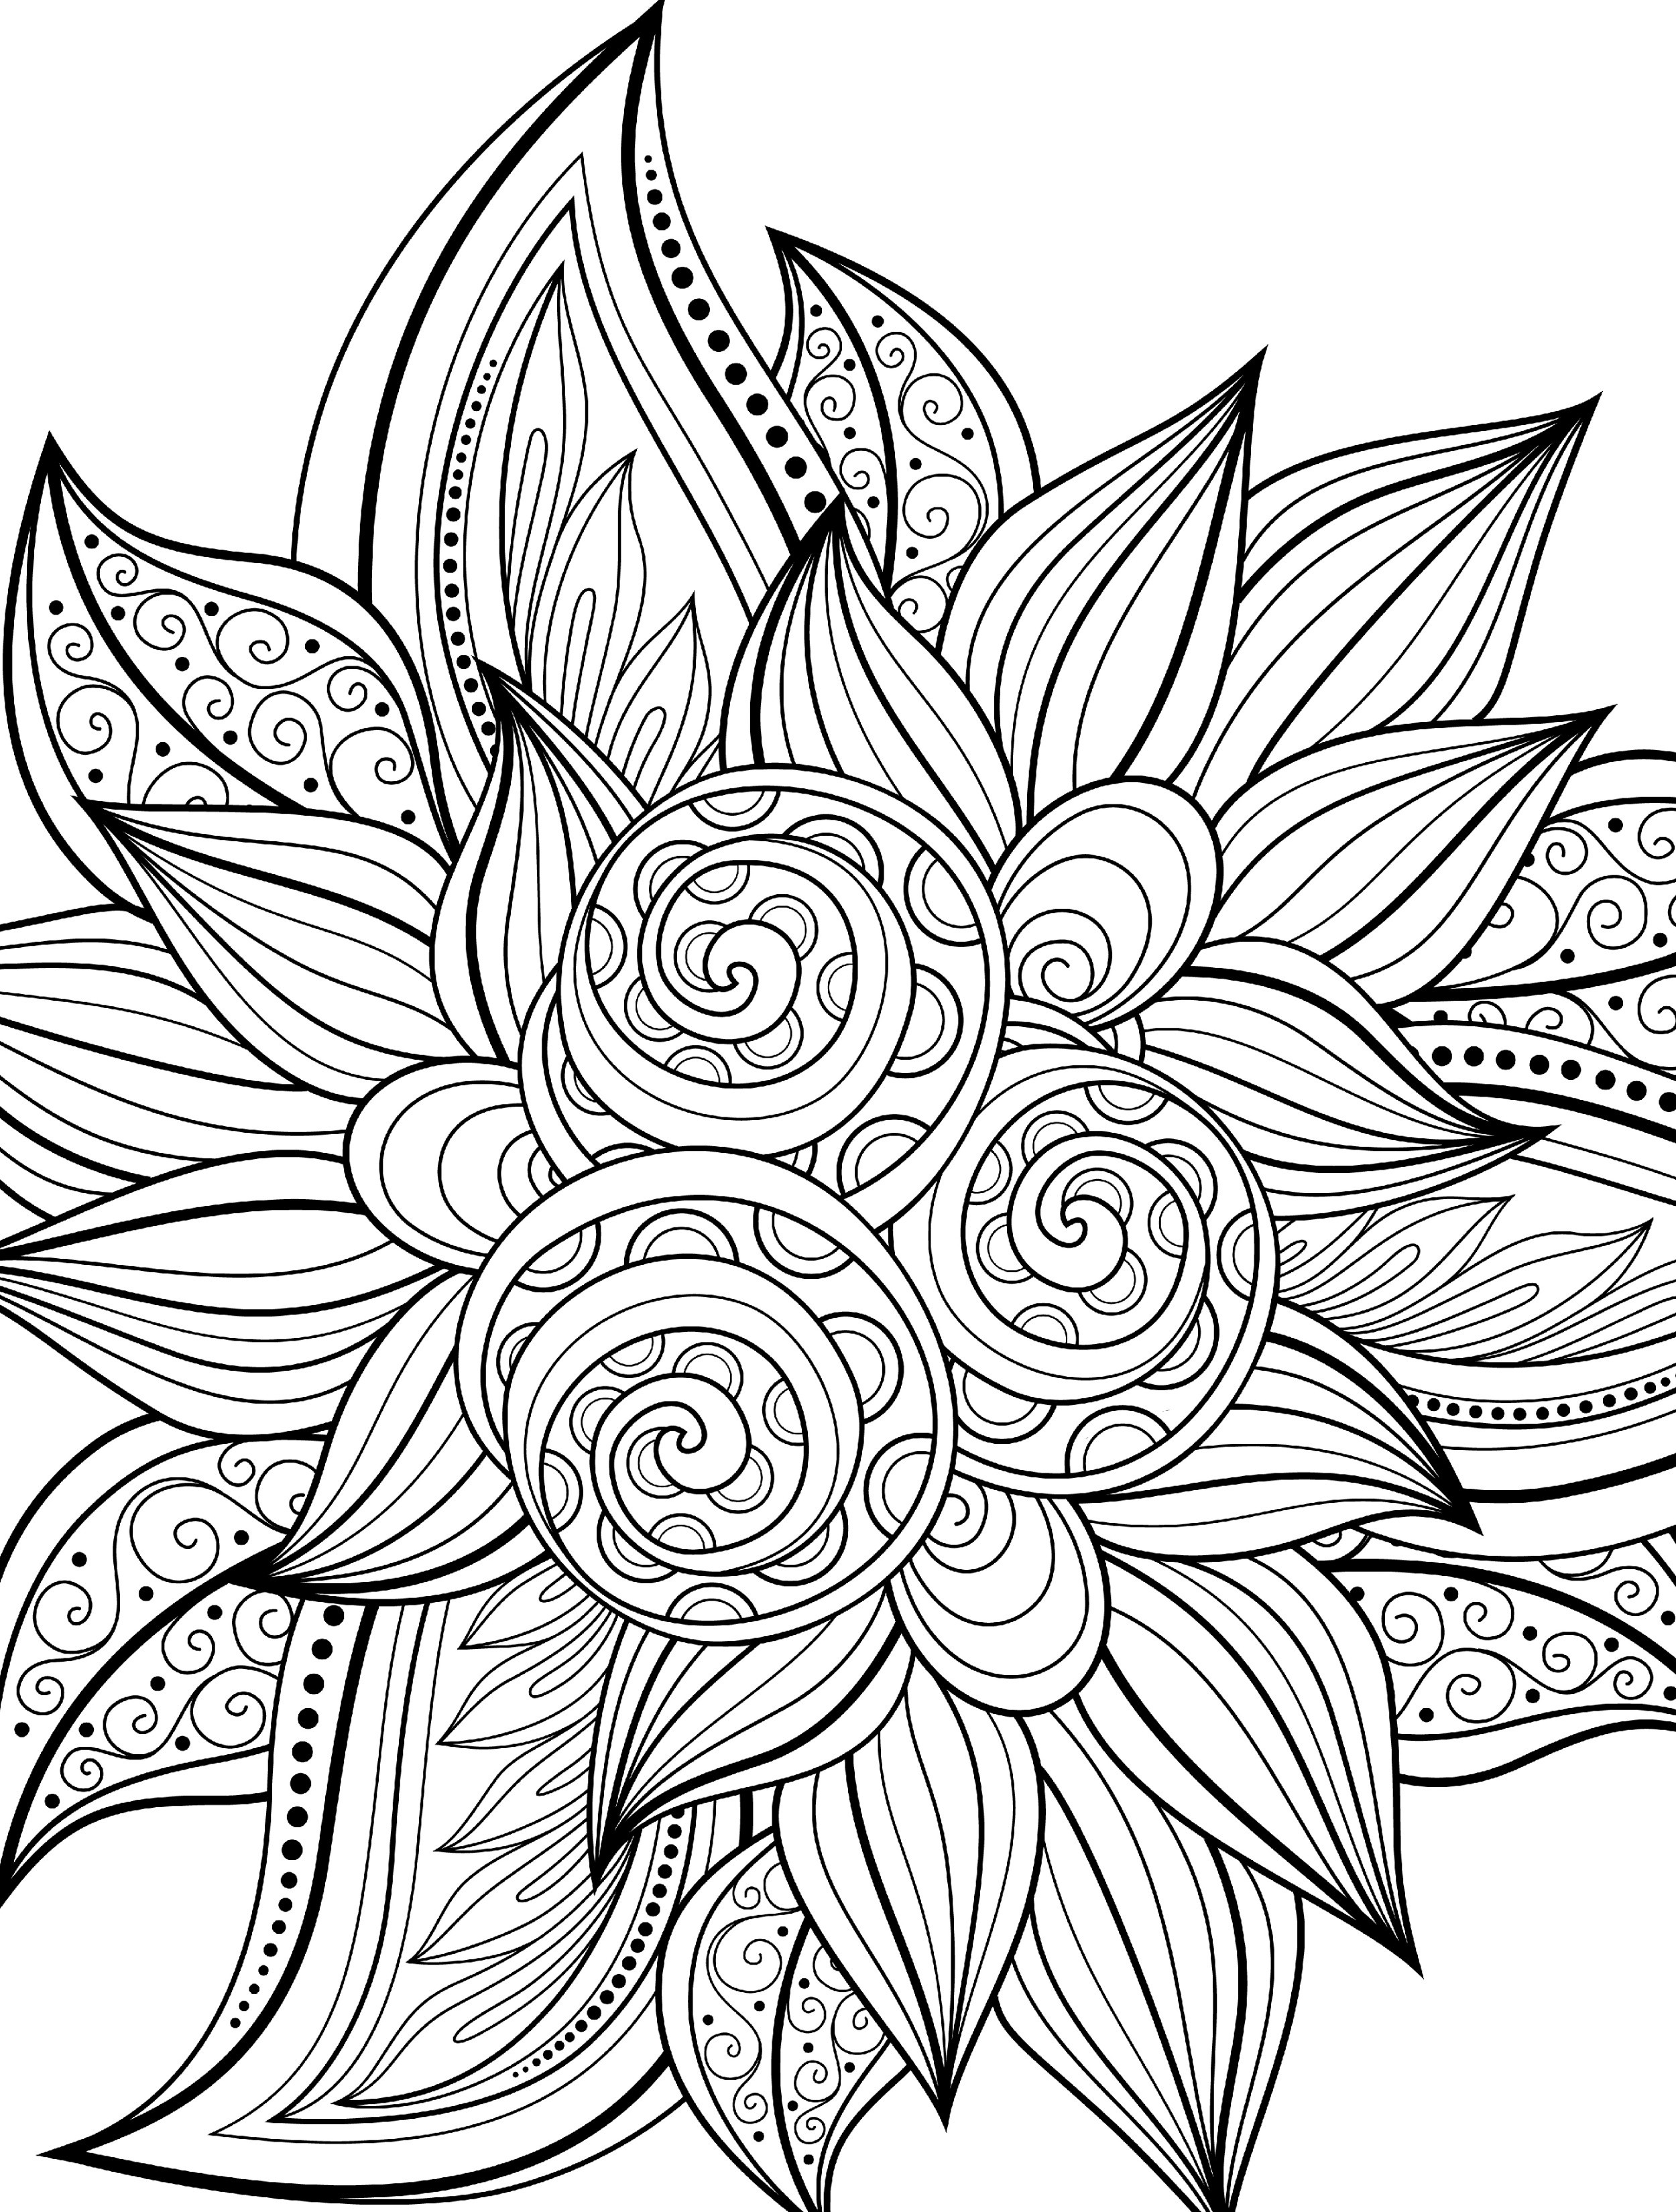 The 25 Best Ideas for Christmas Girl Coloring Pages for Adults - Home